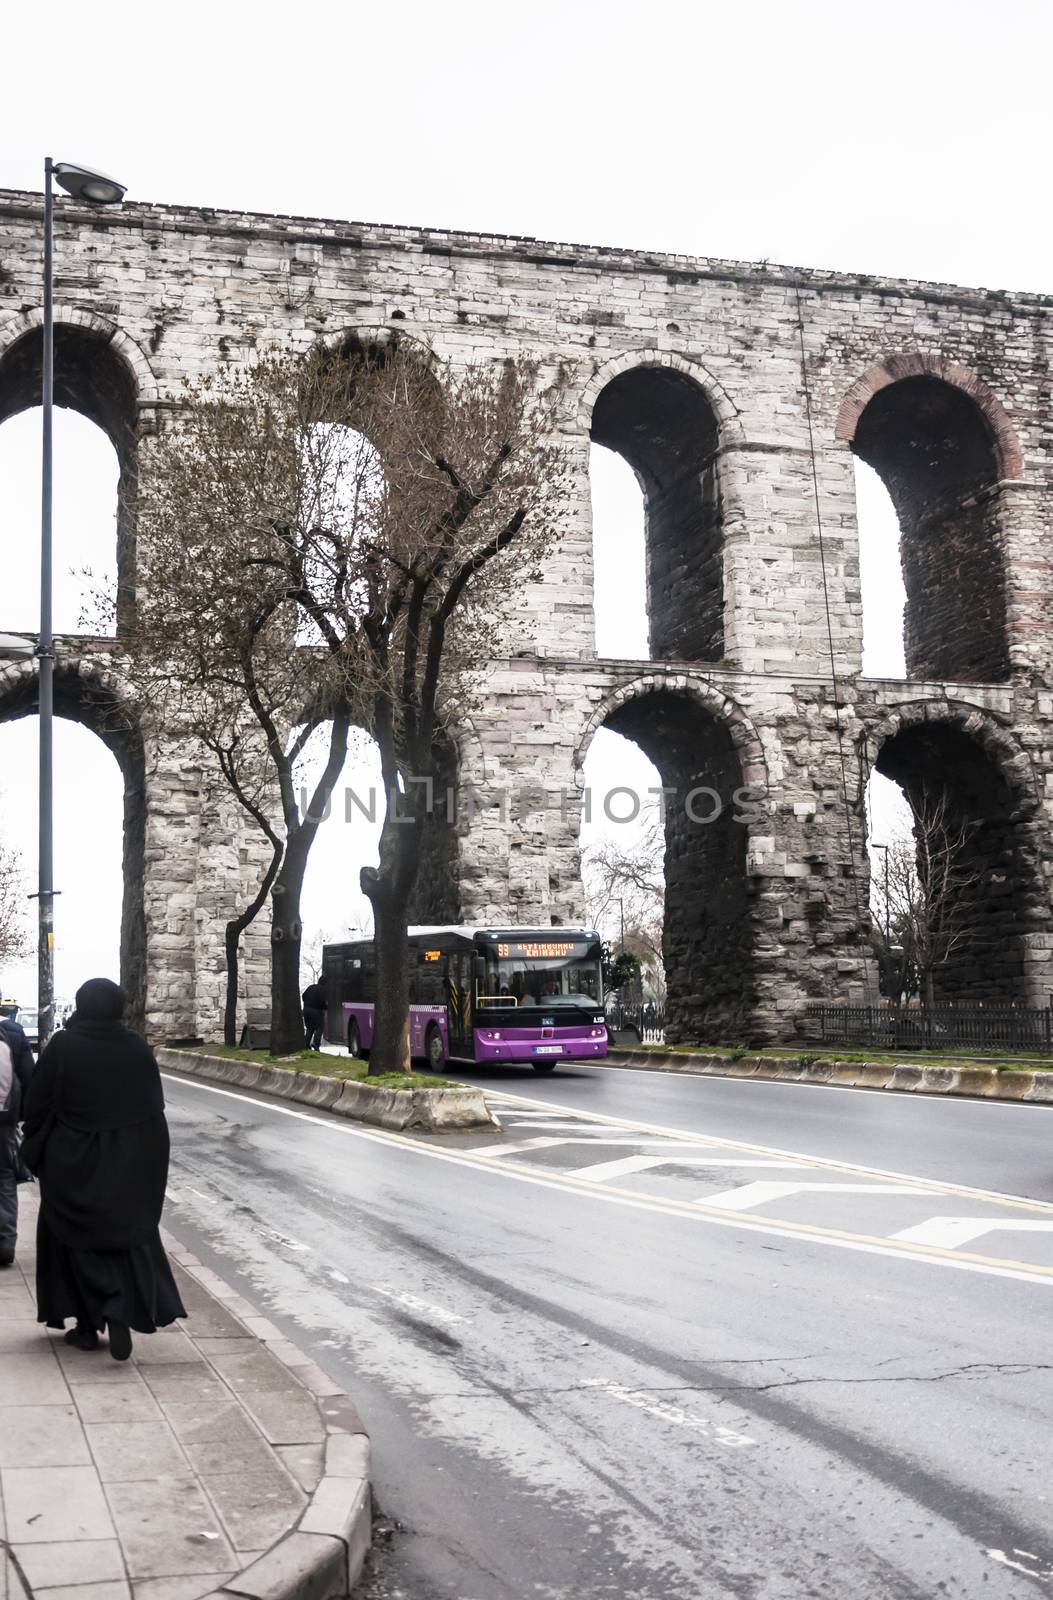 ISTANBUL - FEBRUARY 11: the old roman aqueduct in the city of Istanbul on February 11, 2013 in Istanbul, Turkey